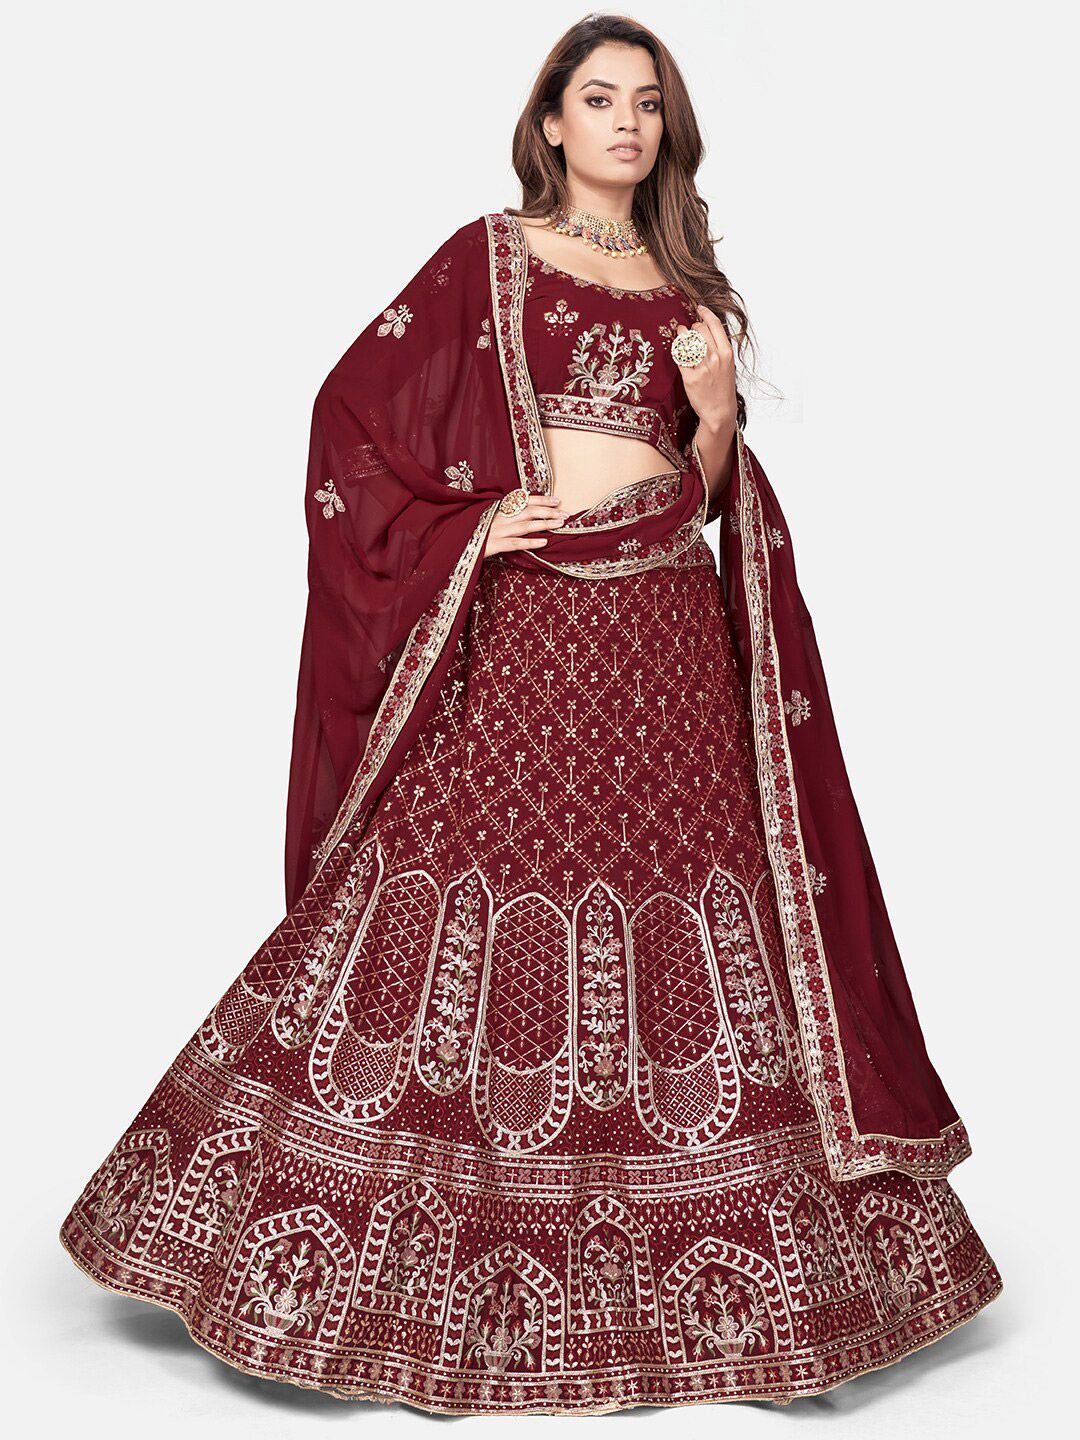 WHITE FIRE Maroon Embroidered Semi-Stitched Lehenga & Unstitched Blouse With Dupatta Price in India